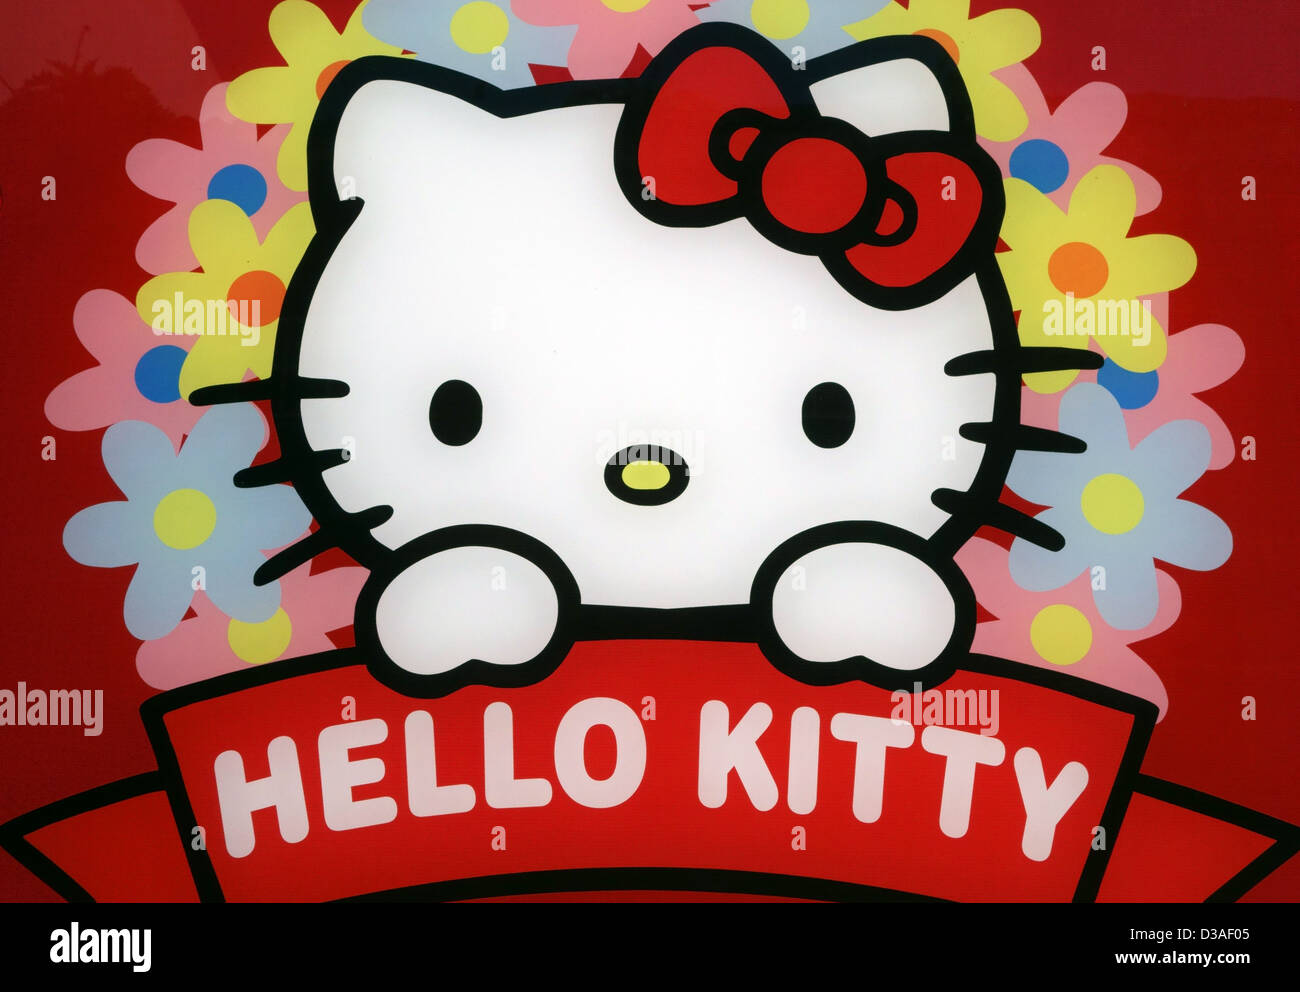 Neon - Hello Kitty and Friends' Posters